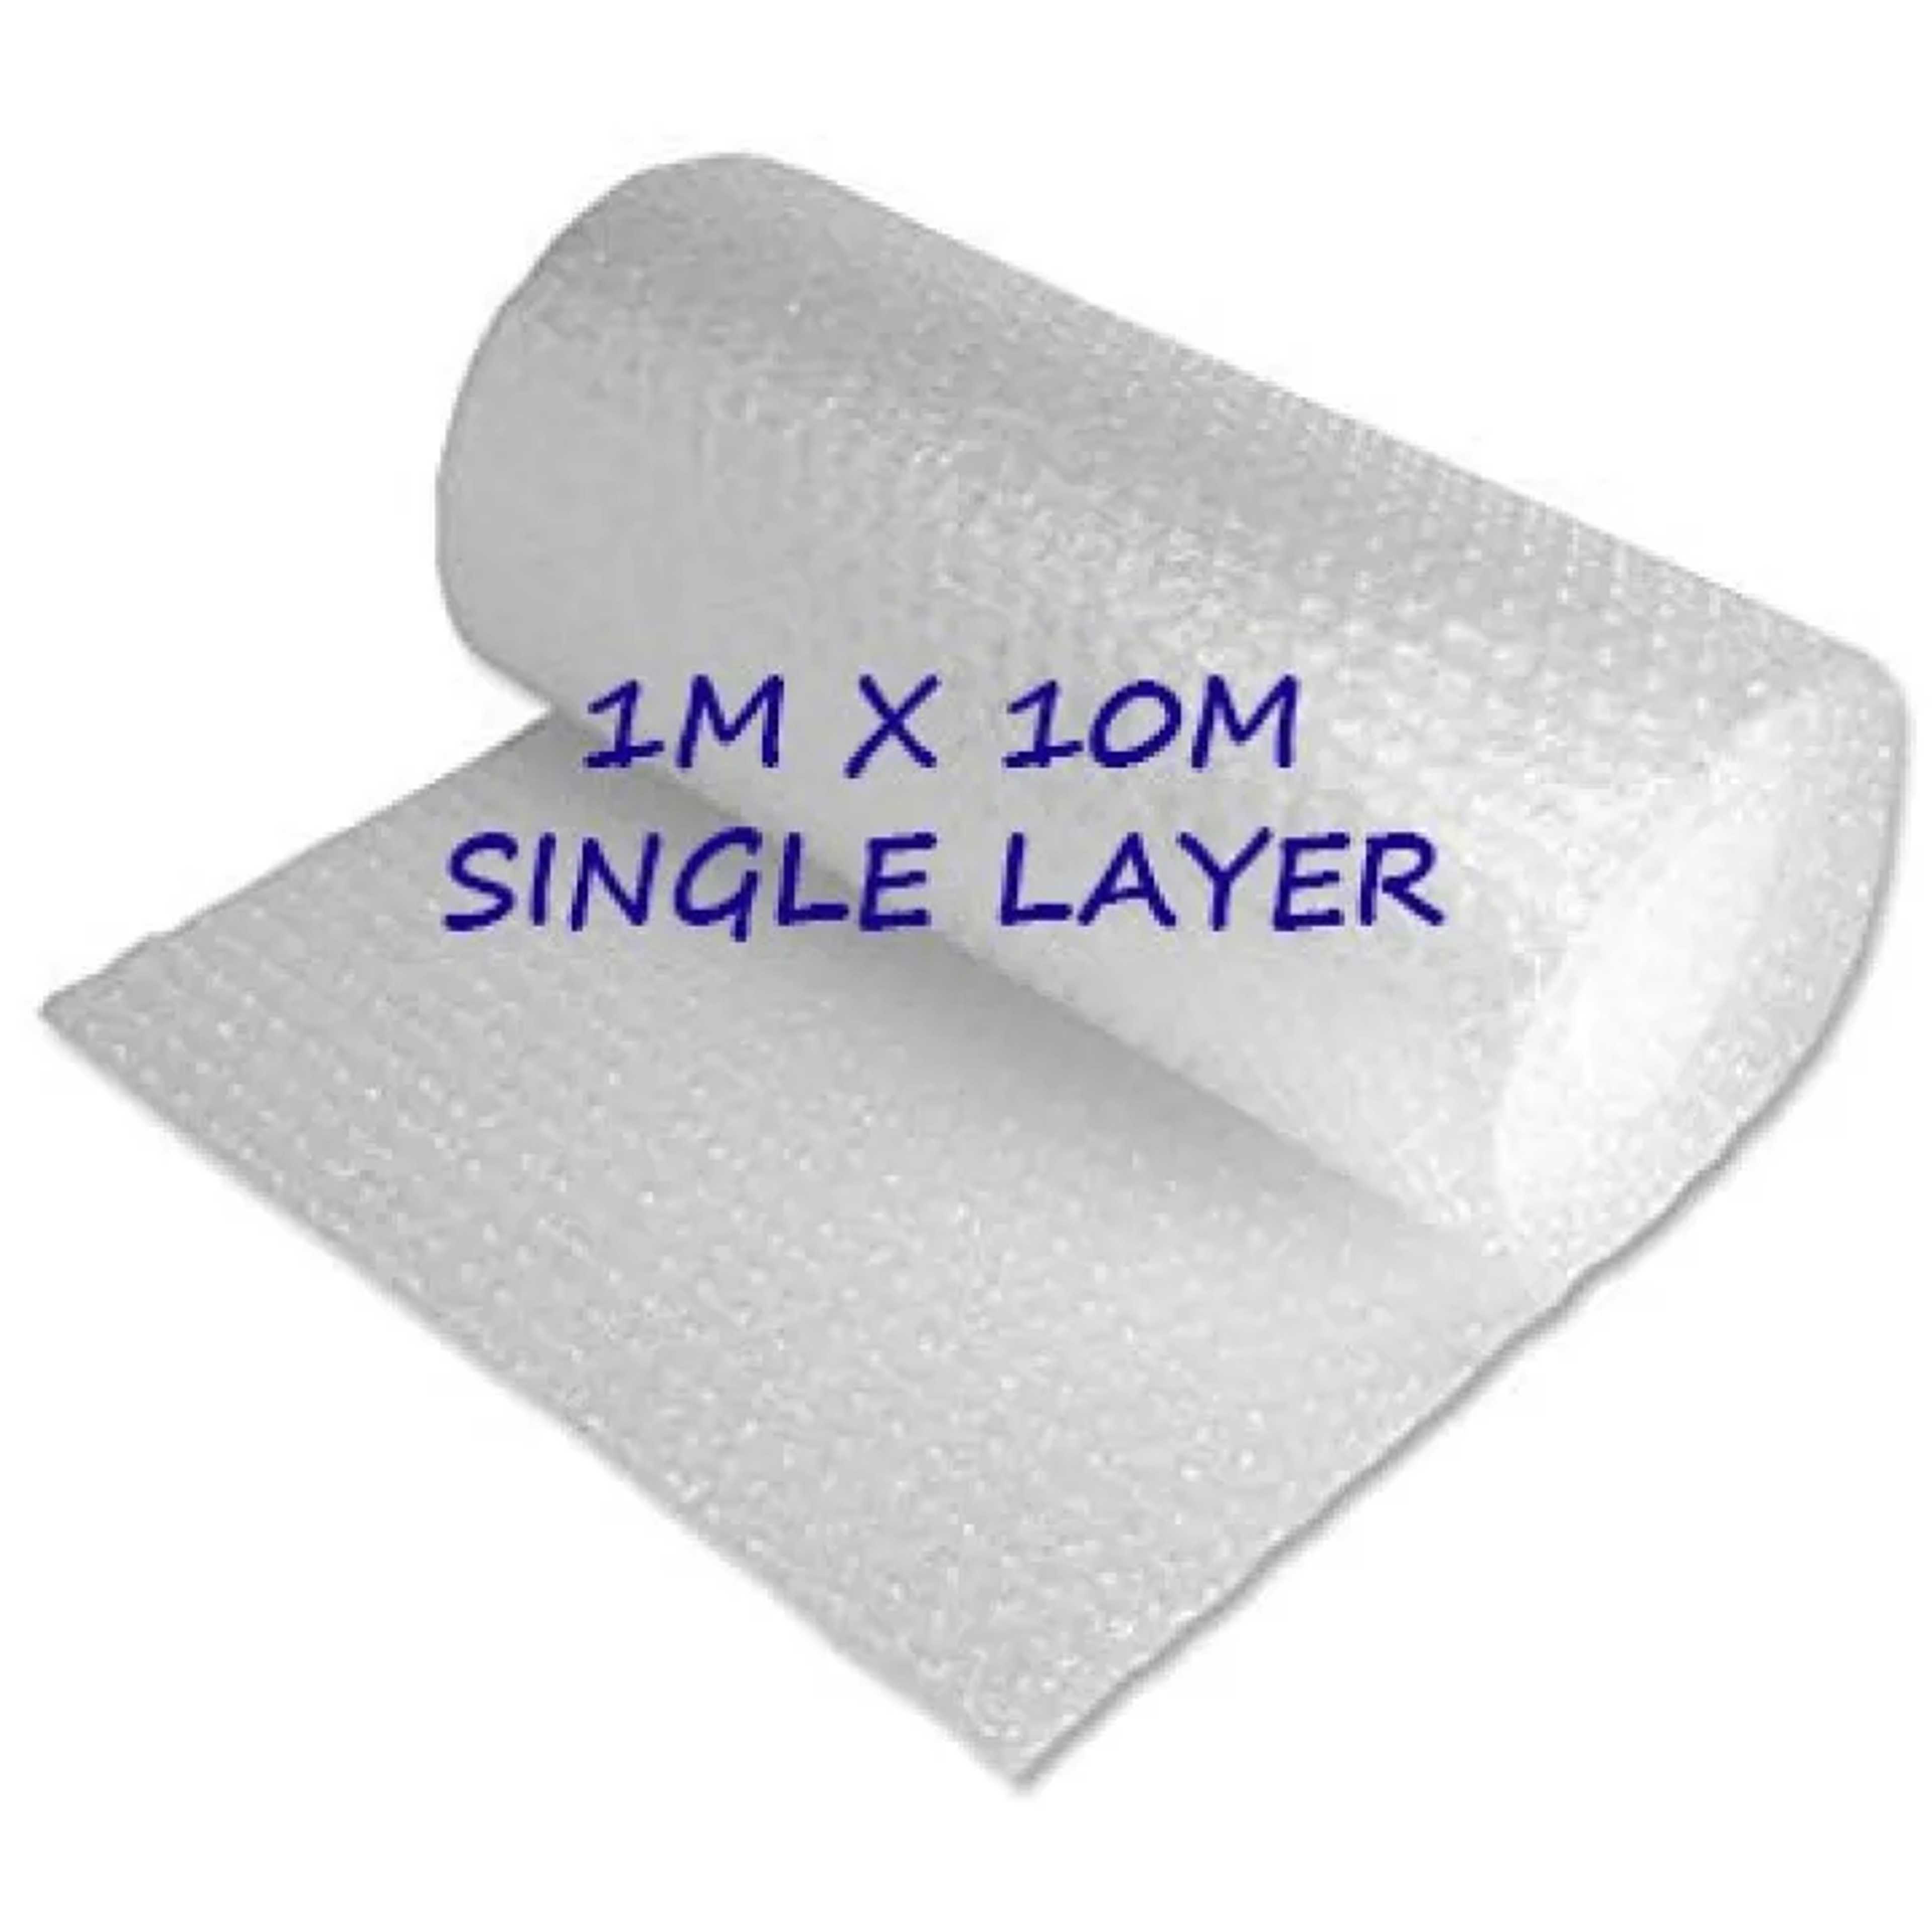 Bubble Wrap 10 Meter Length/1 Meter / 12 Inches Width Packing Material High Quality. Strong Bubbles